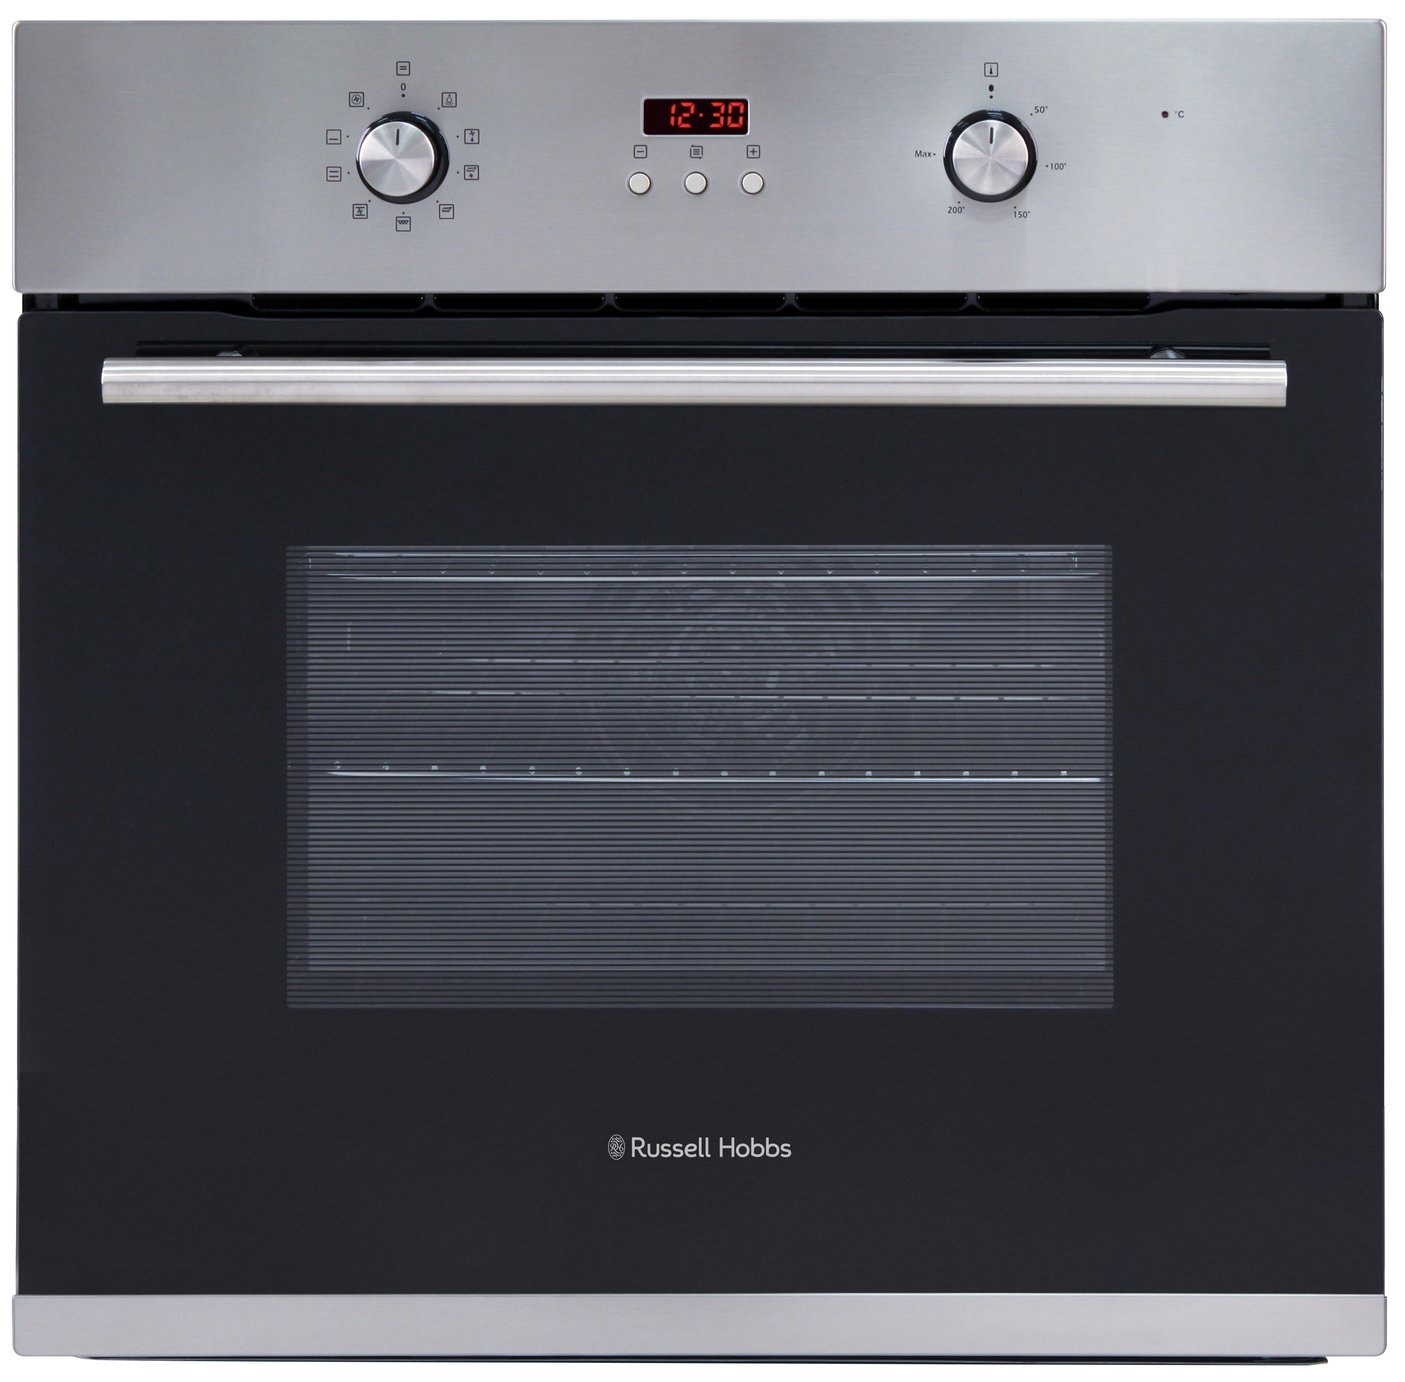 Russell Hobbs RHEO6501SS Built In Electric Oven Review